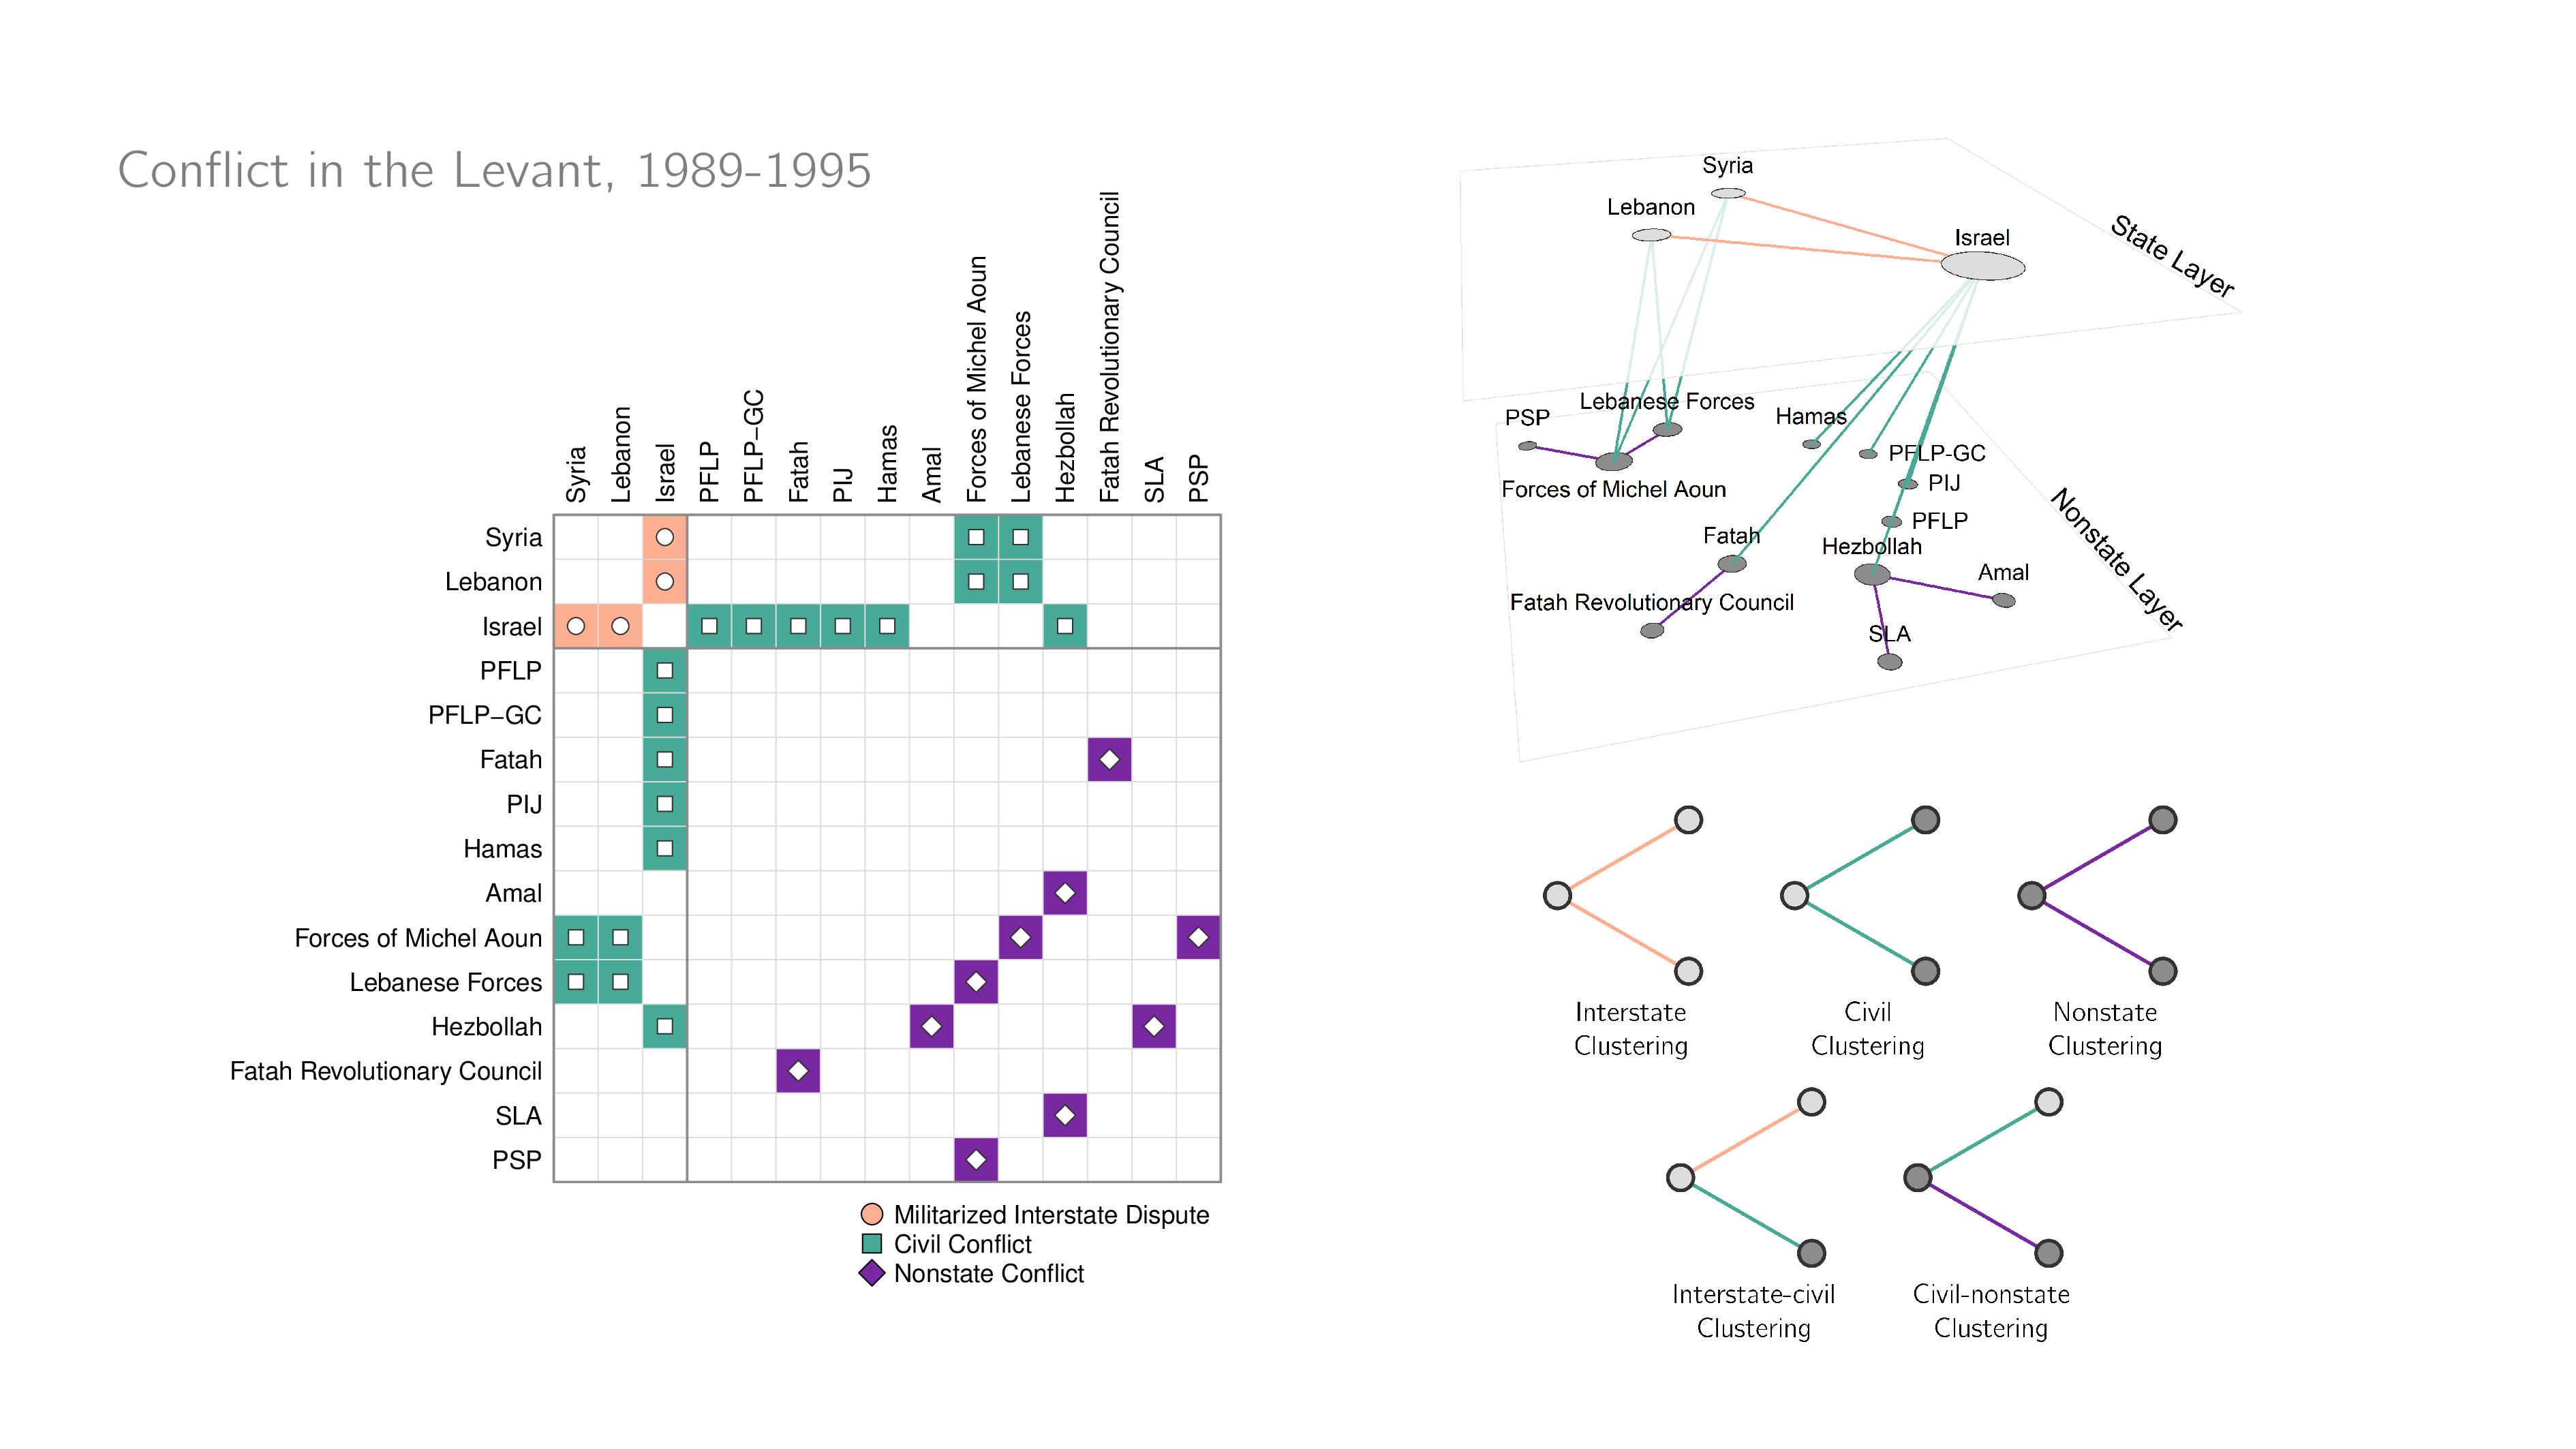 Multilayer network representation of conflict in the Levant region, 1989-1995.